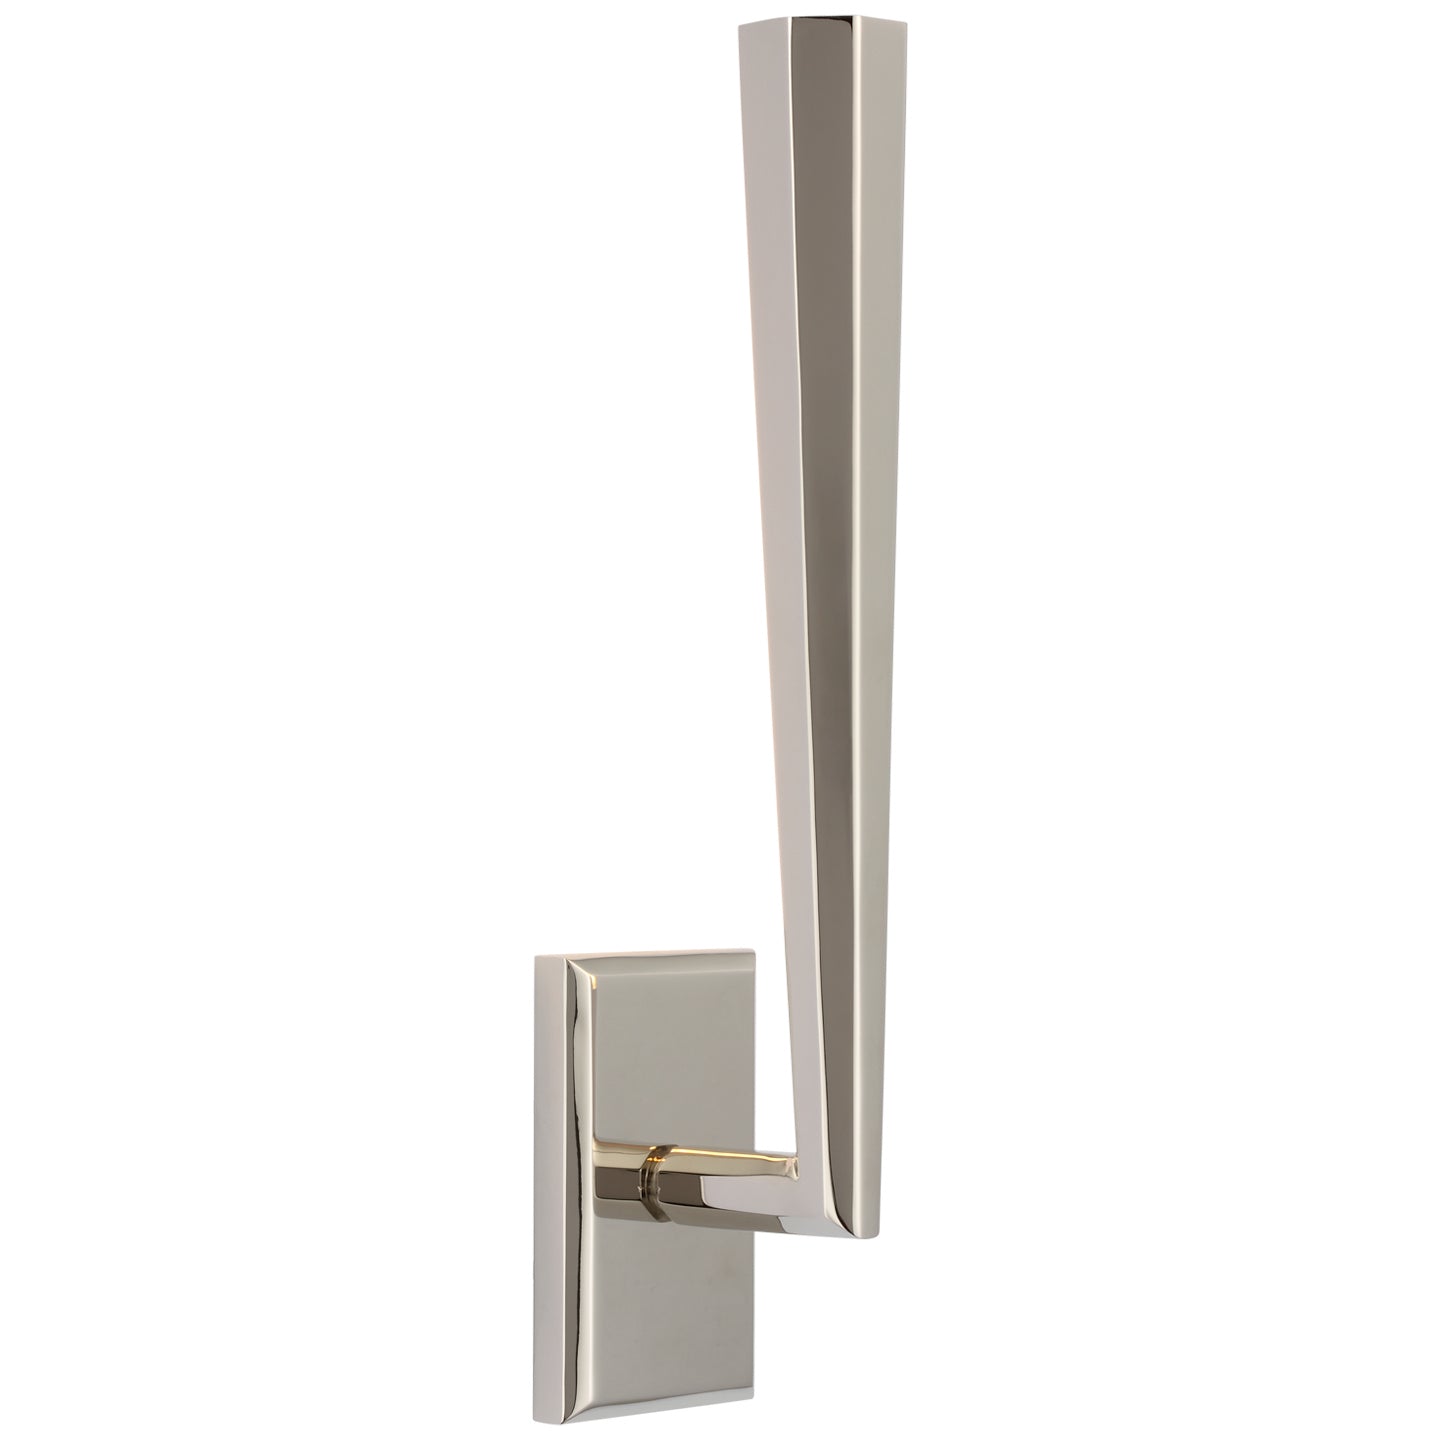 Load image into Gallery viewer, Visual Comfort Signature - TOB 2712PN - LED Wall Sconce - Galahad - Polished Nickel
